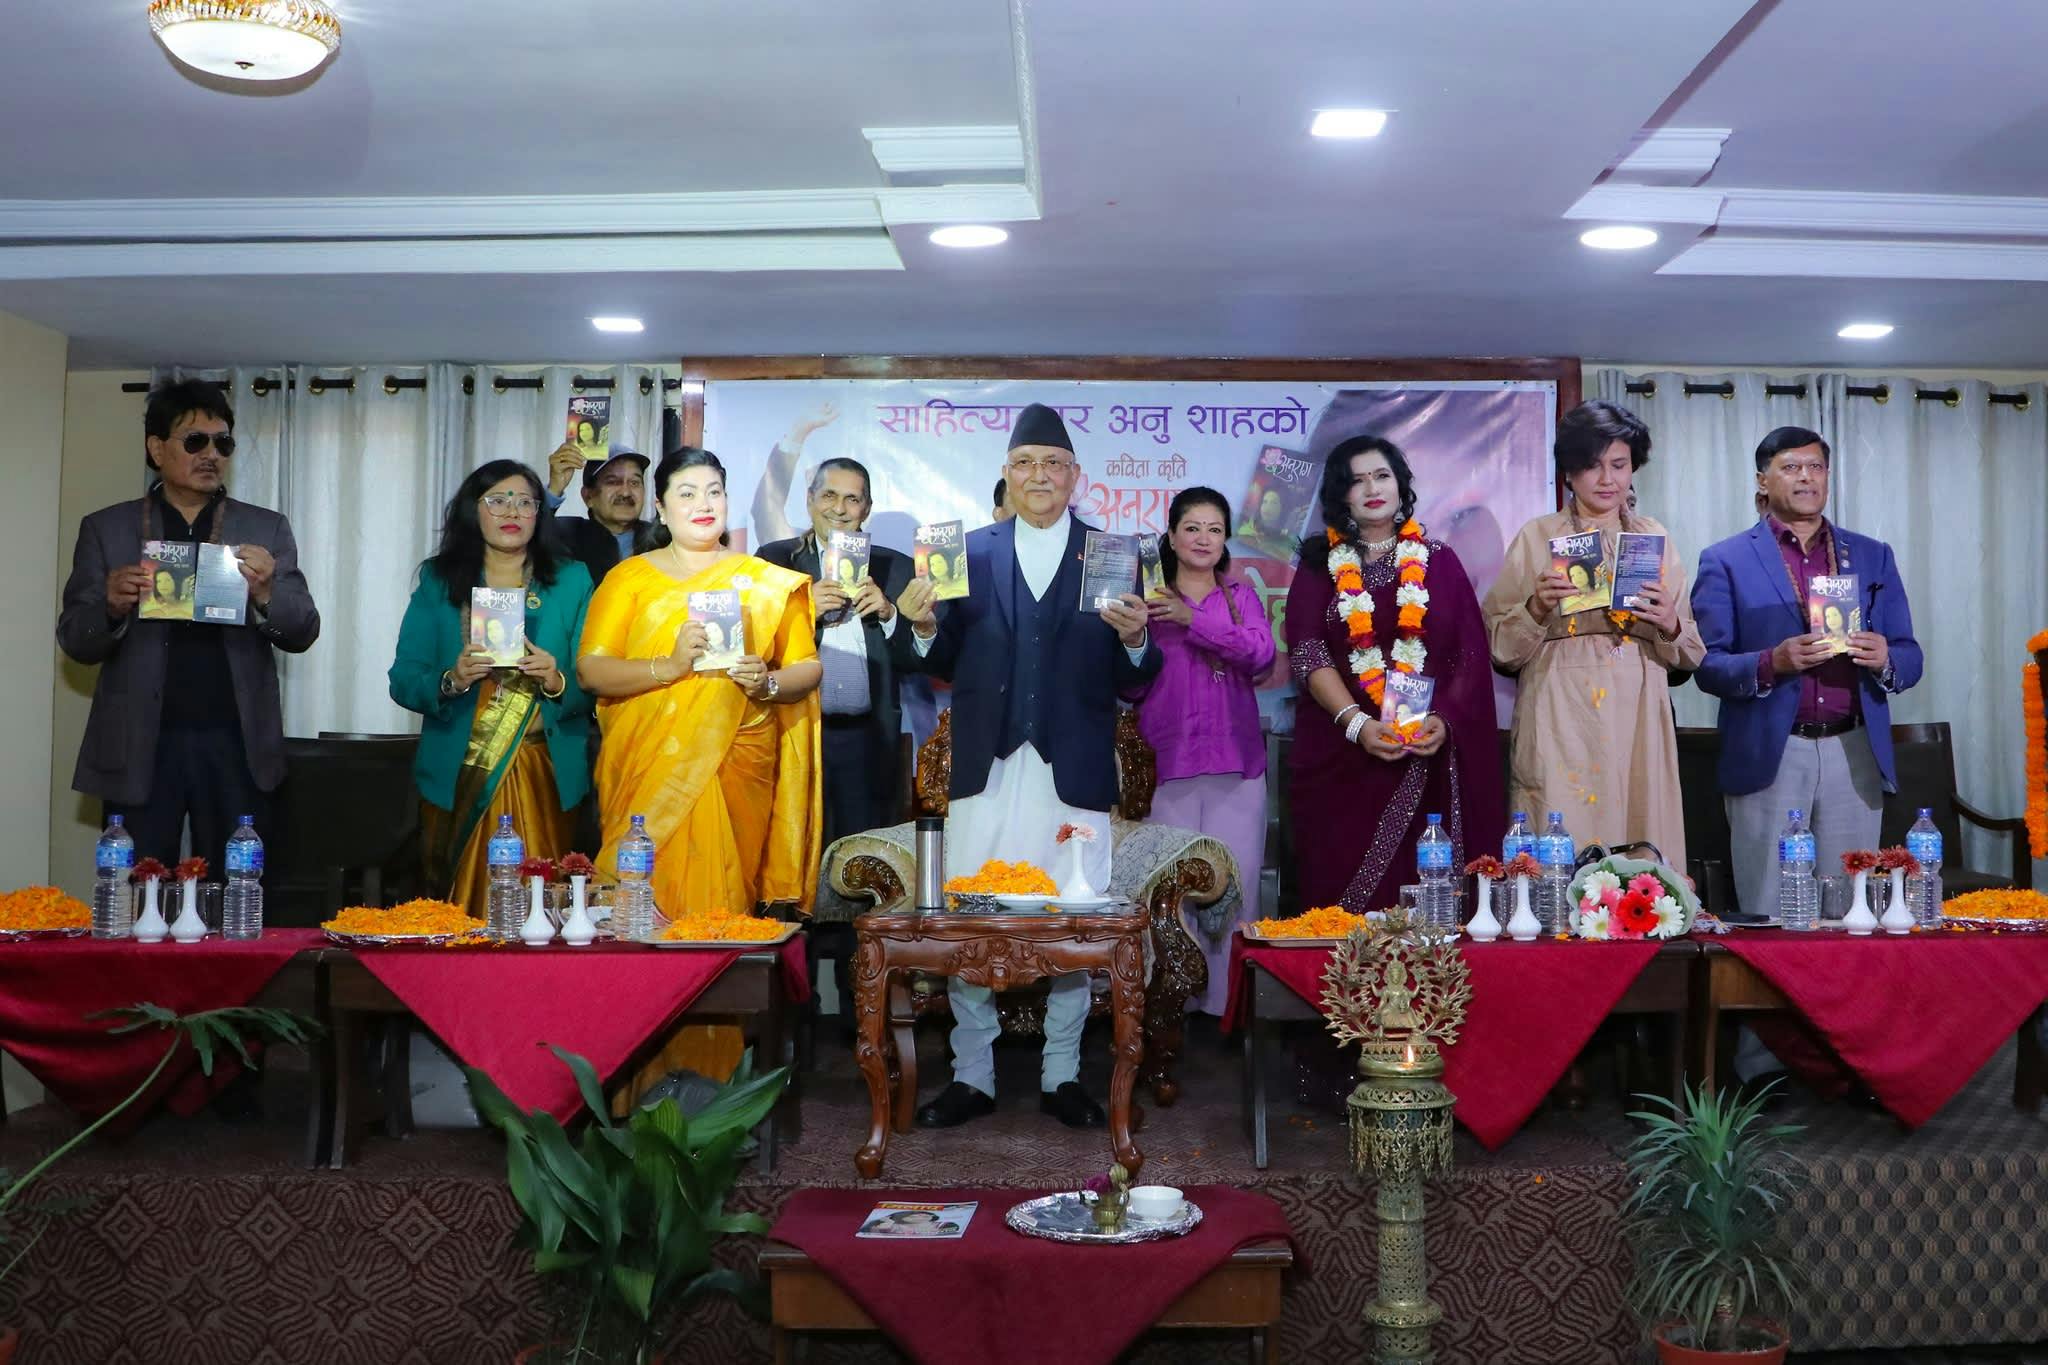 Former Prime Minister KP Oli launched the poetry collection 'Anurag' by writer Anu Shah.